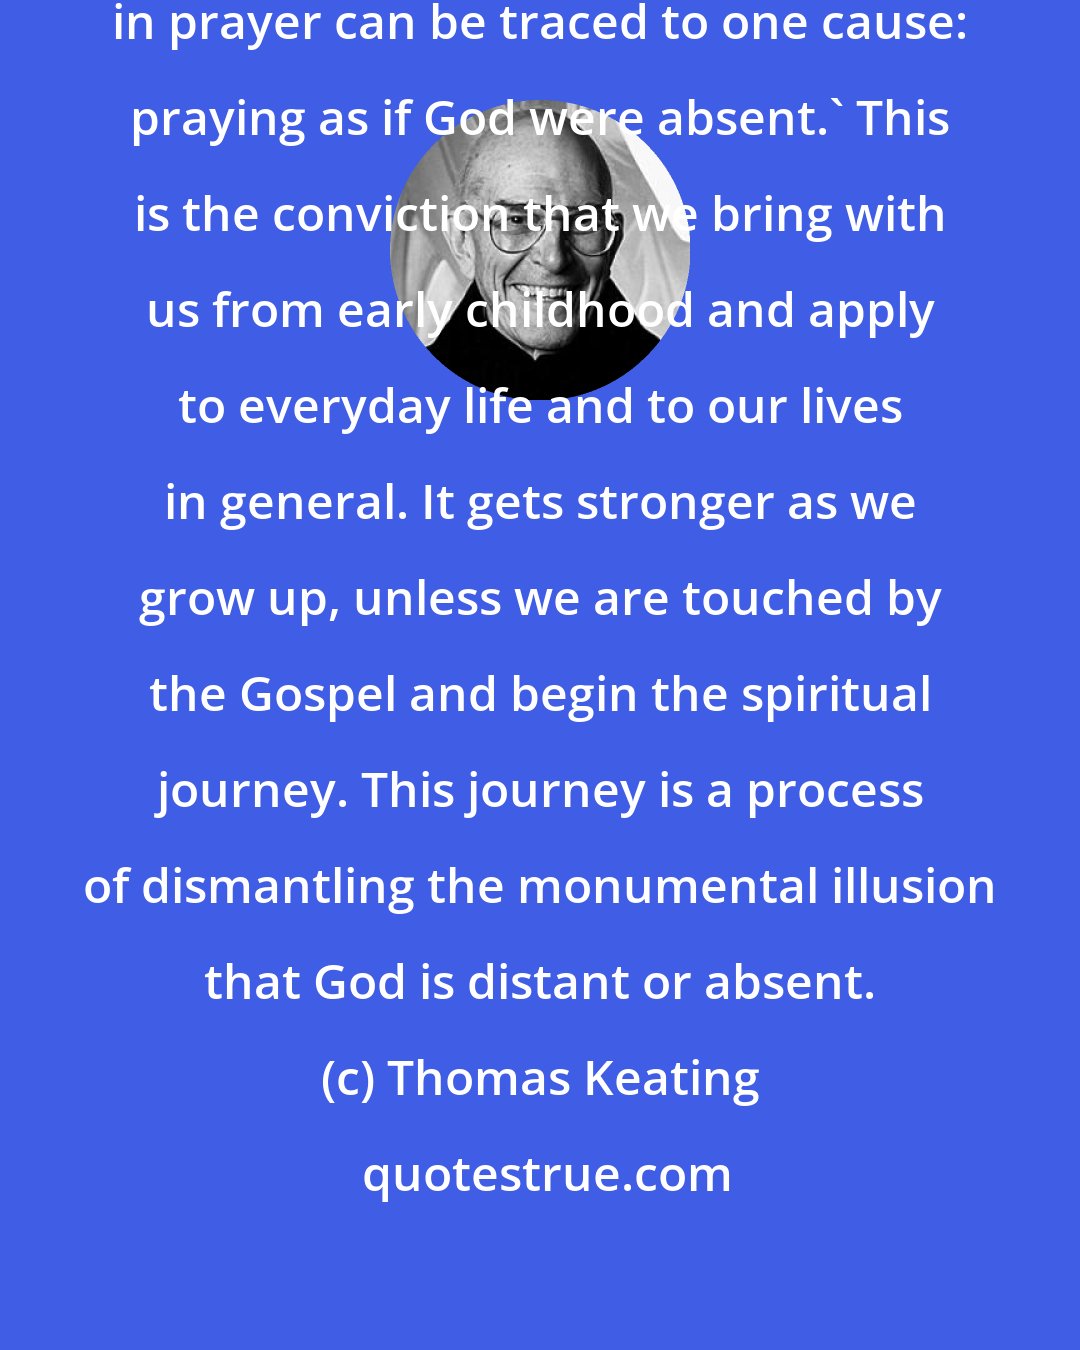 Thomas Keating: St. Teresa of Avila wrote: 'All difficulties in prayer can be traced to one cause: praying as if God were absent.' This is the conviction that we bring with us from early childhood and apply to everyday life and to our lives in general. It gets stronger as we grow up, unless we are touched by the Gospel and begin the spiritual journey. This journey is a process of dismantling the monumental illusion that God is distant or absent.